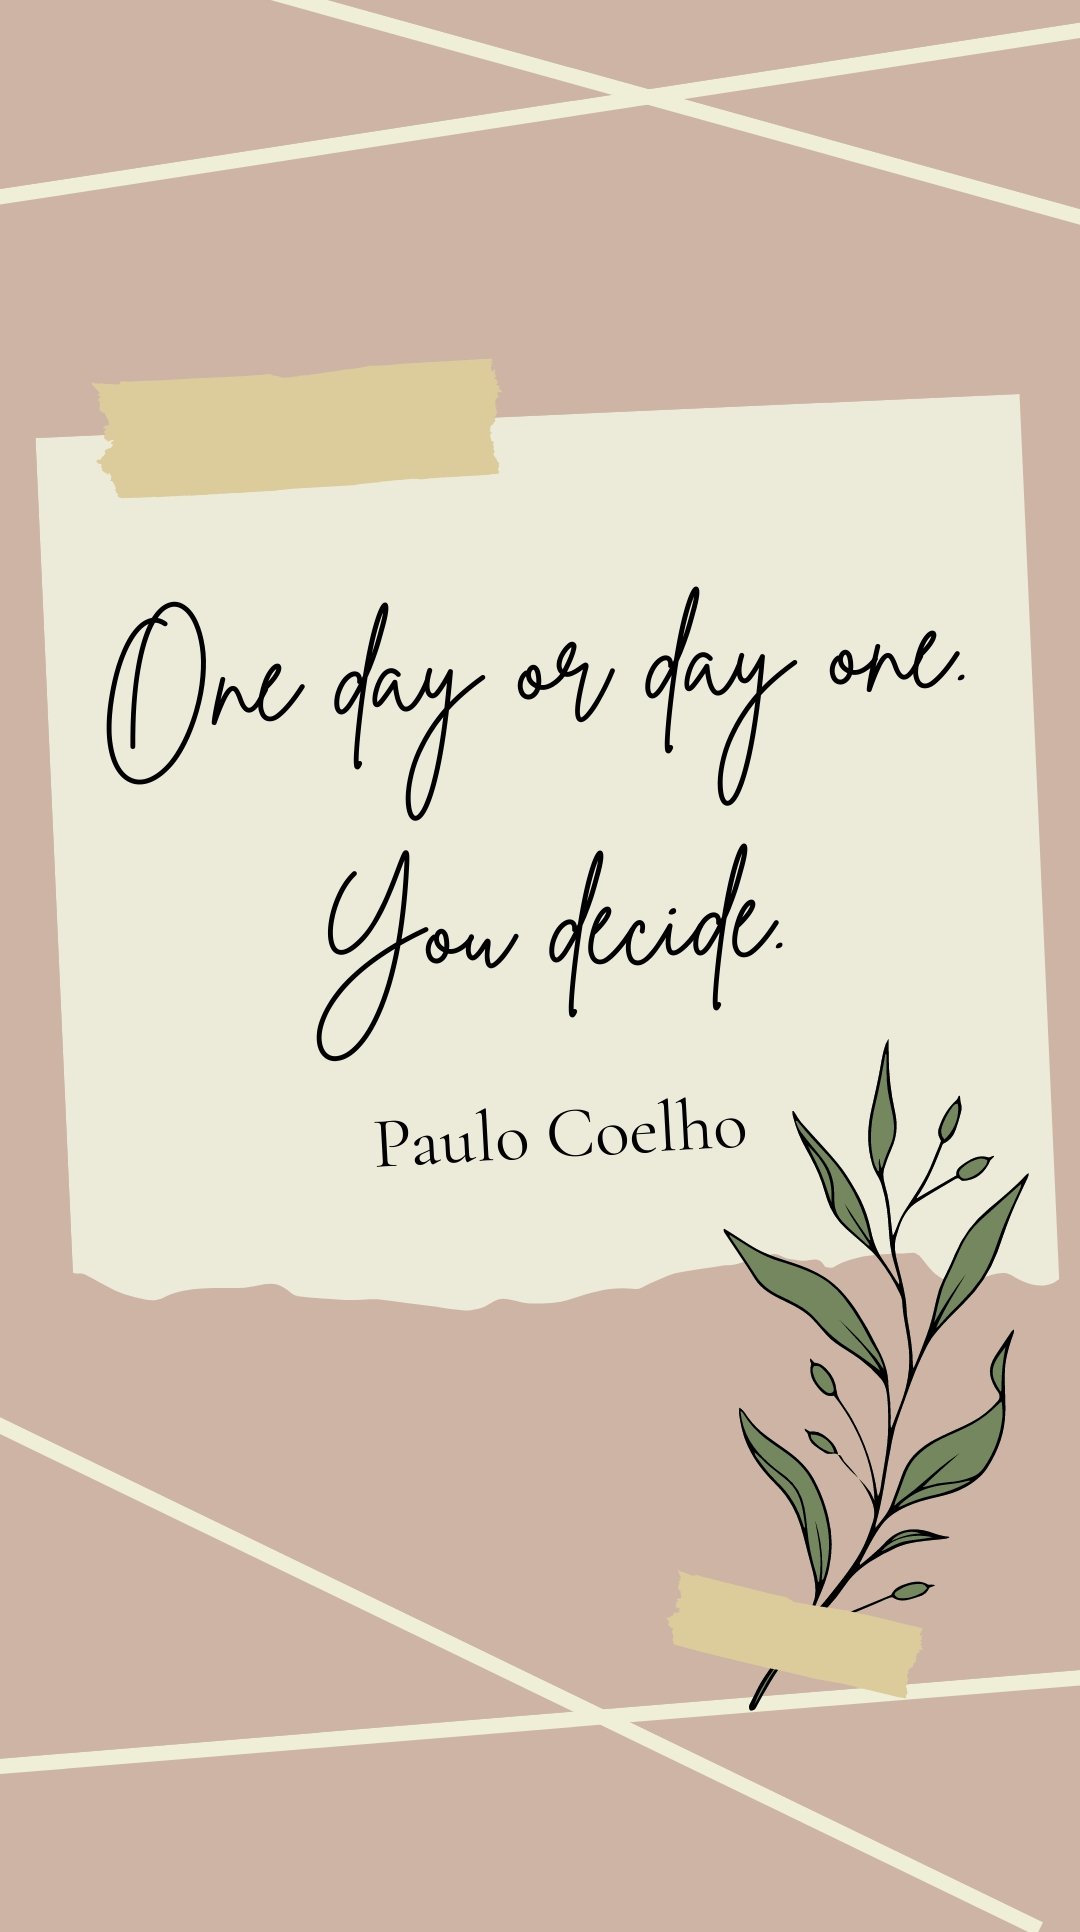 Paulo Coelho - “One day or day one. You decide.”